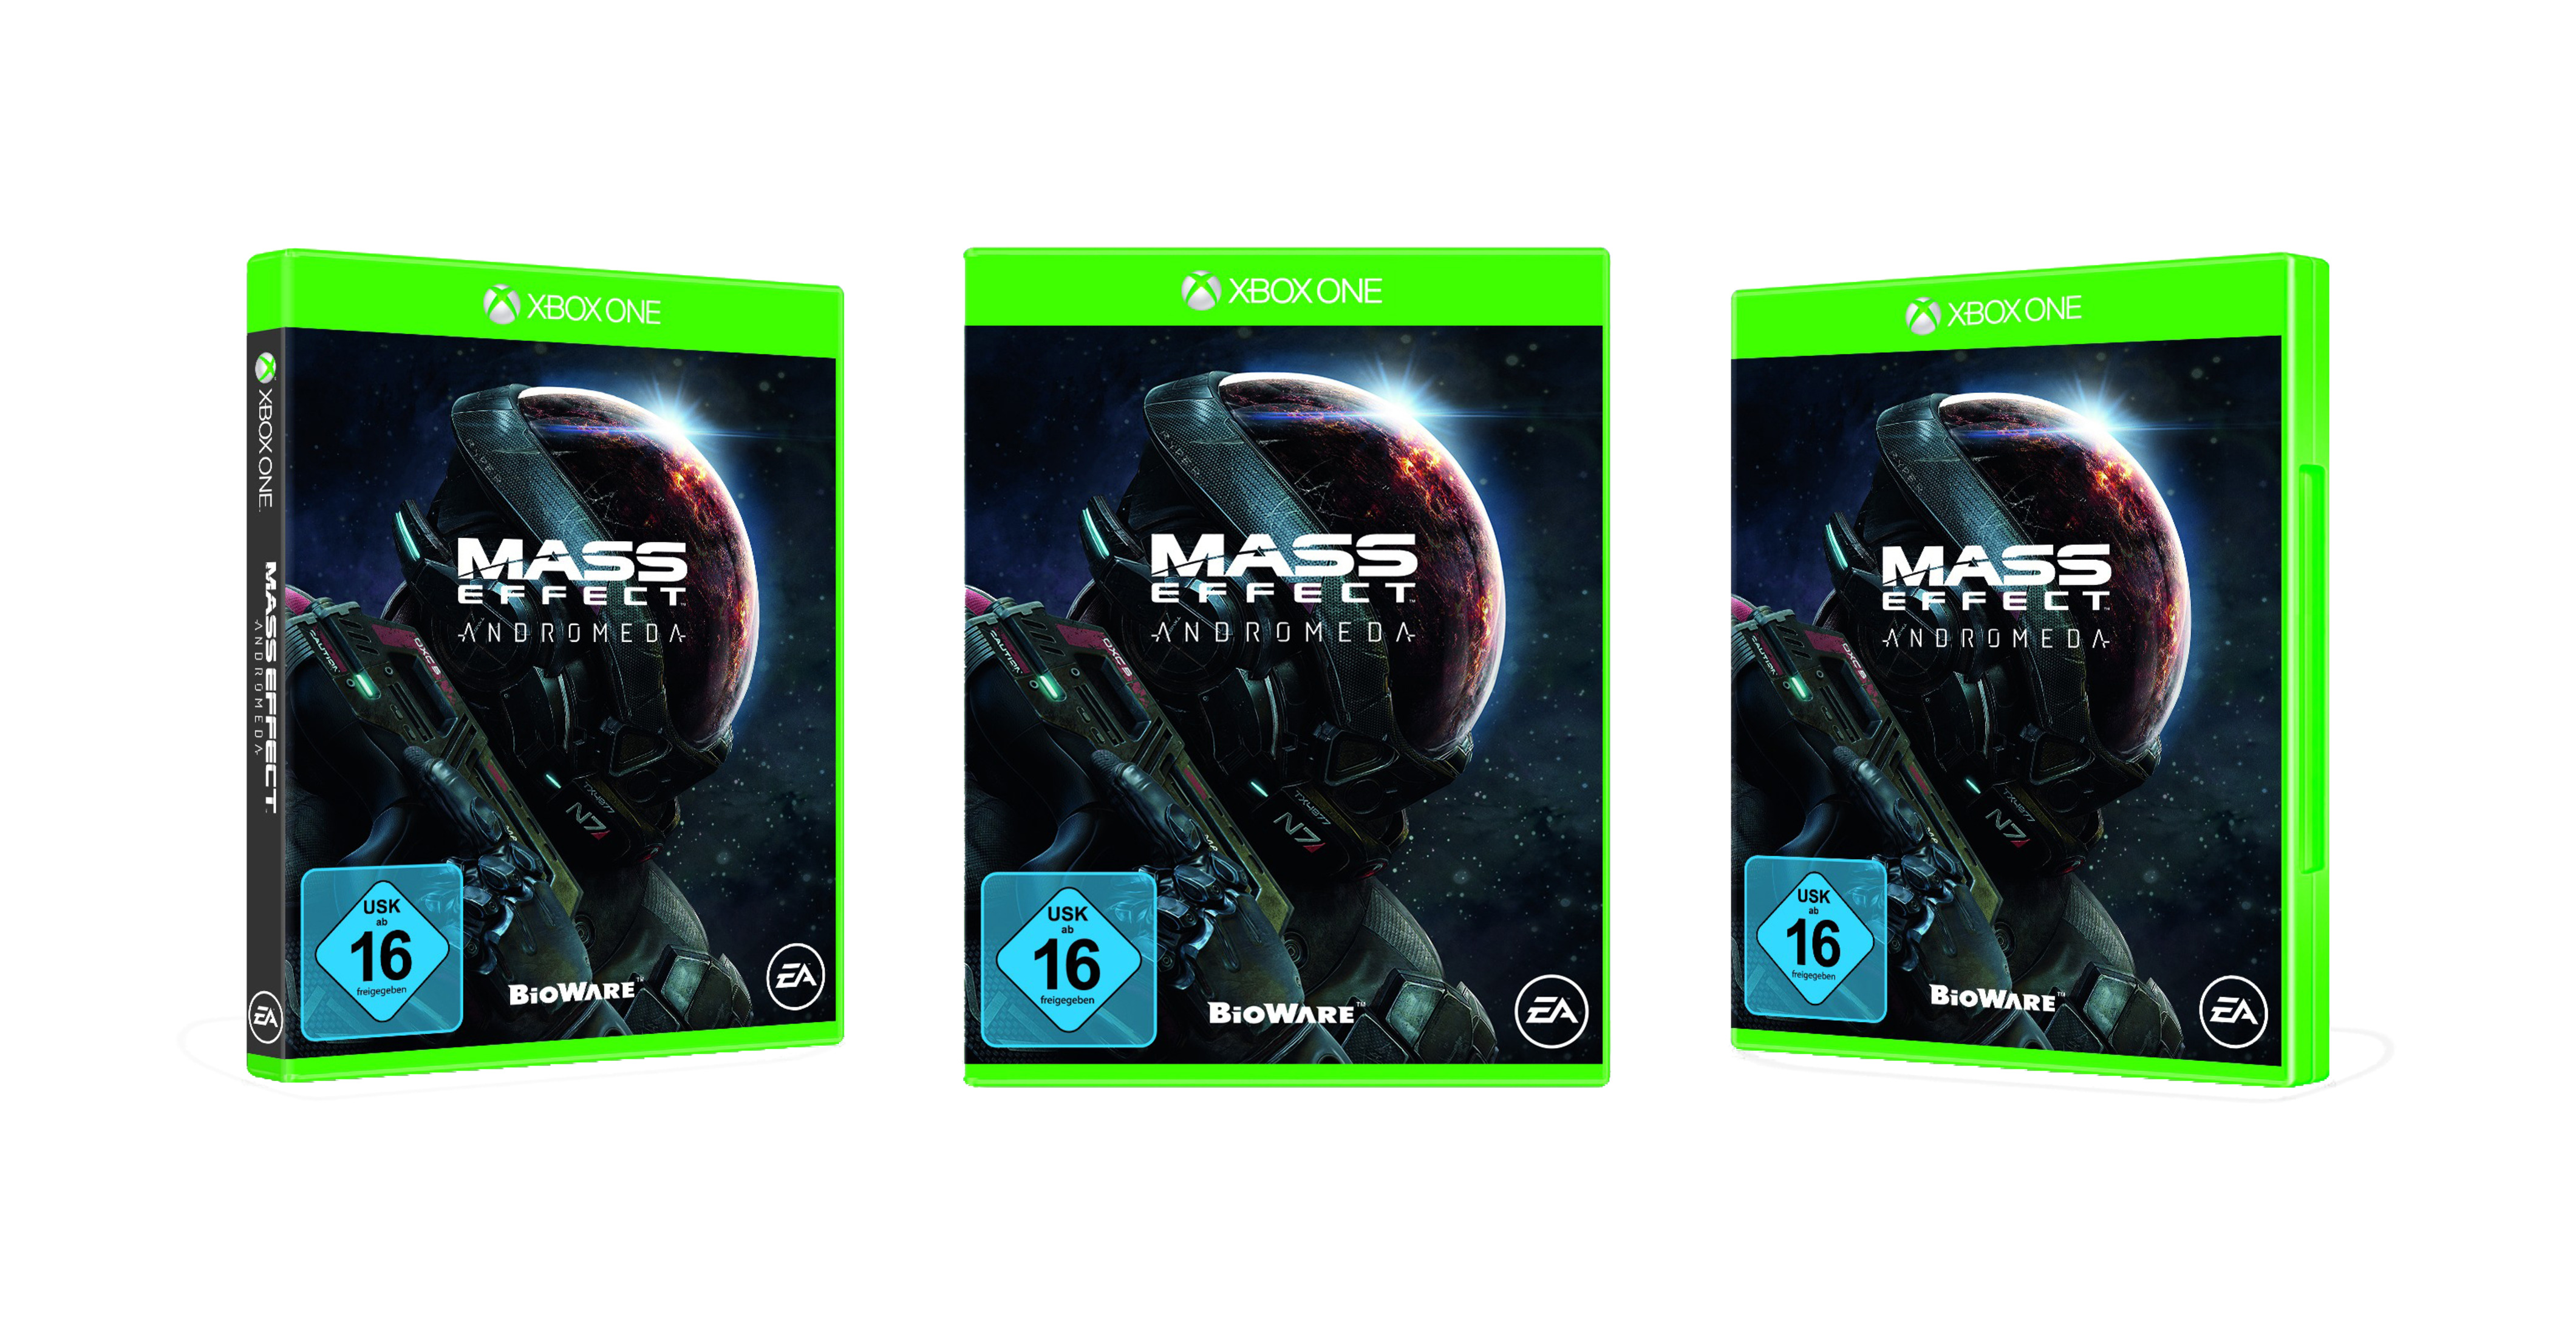 Mass Effect Andromeda - One] [Xbox